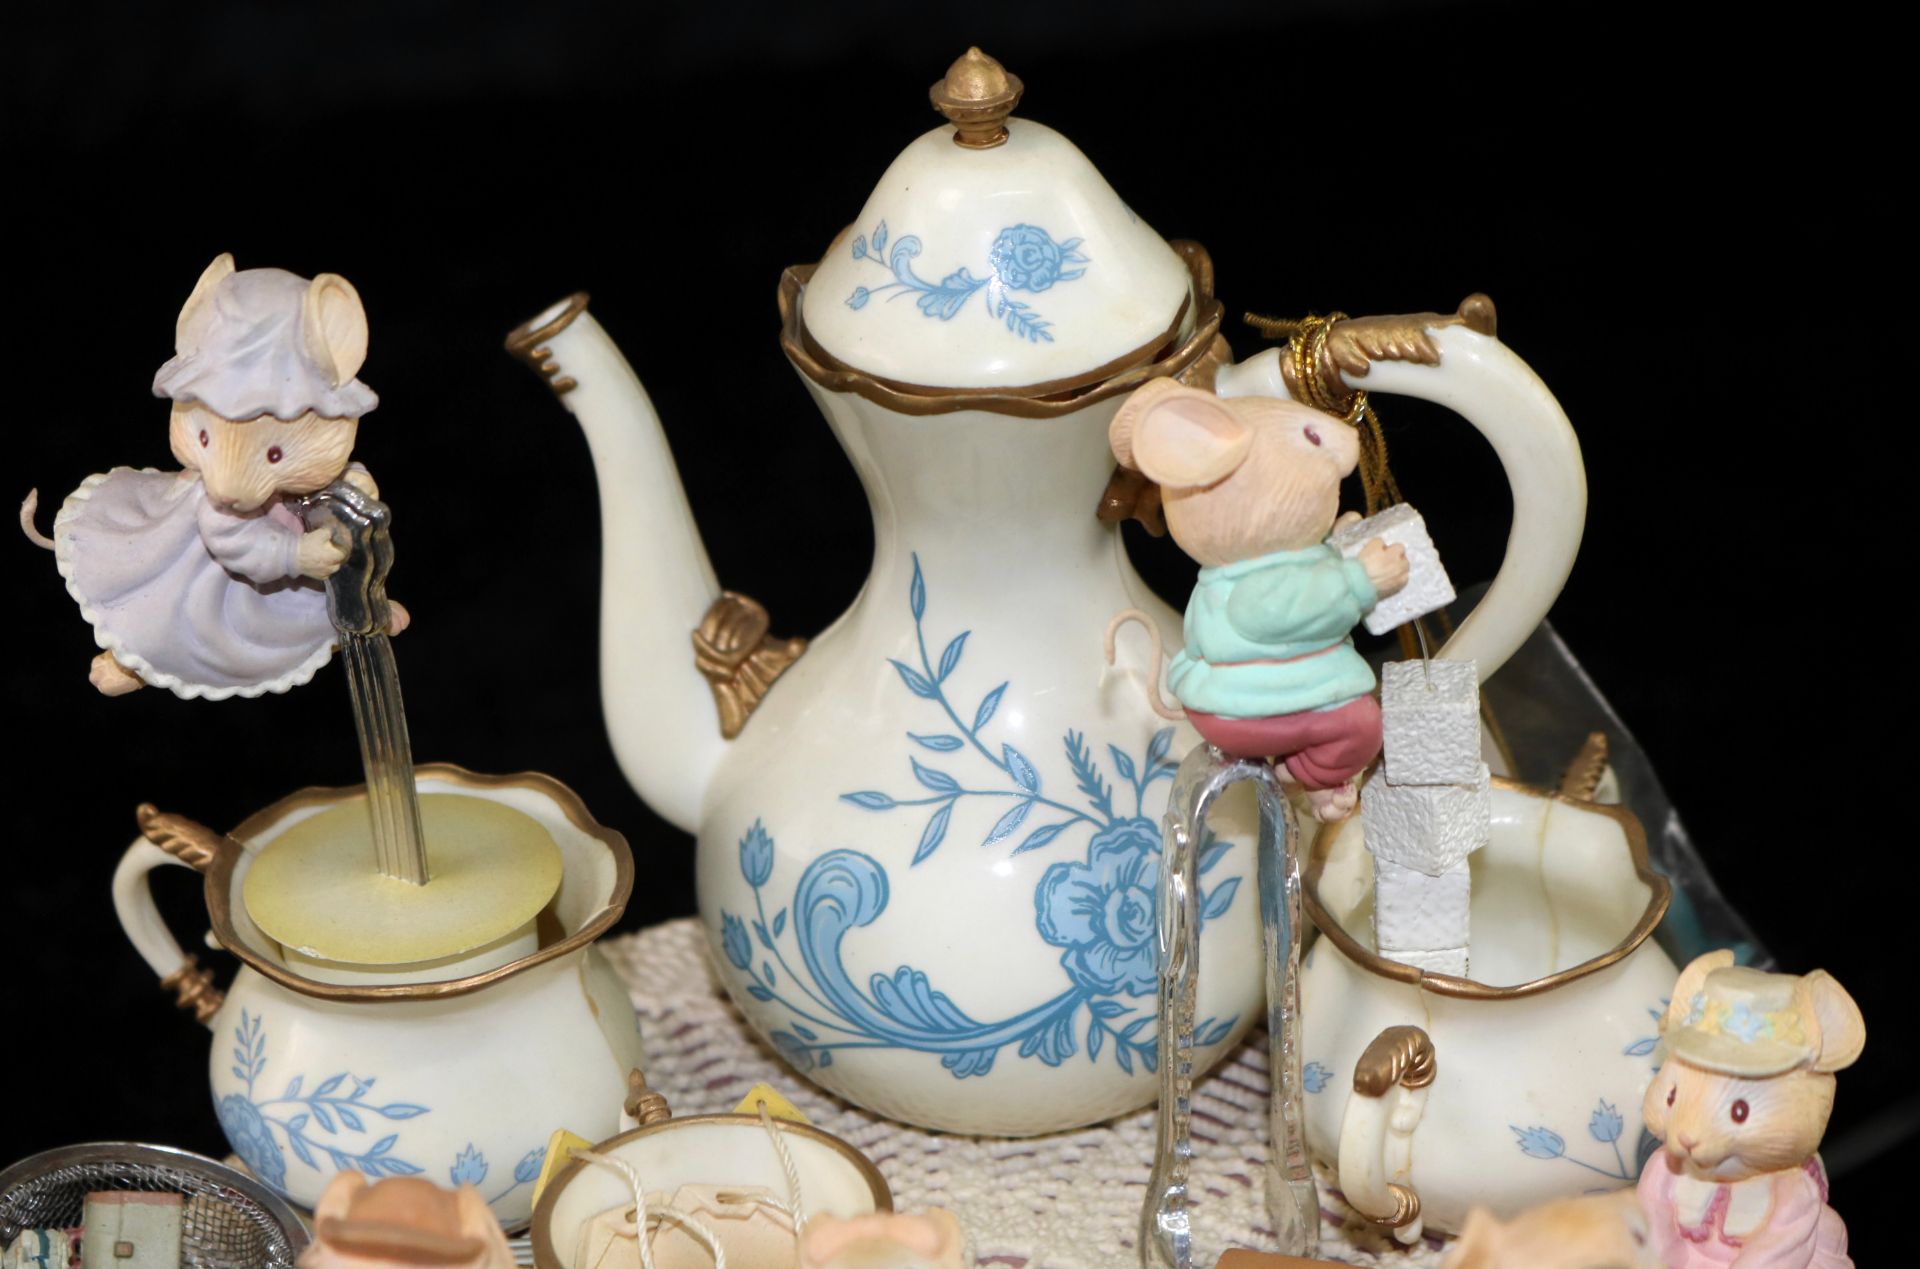 Enesco Spieluhr "It's Tea Lightful", Melodie "Tea for Two", 2. H. 20. Jh. - Image 3 of 5